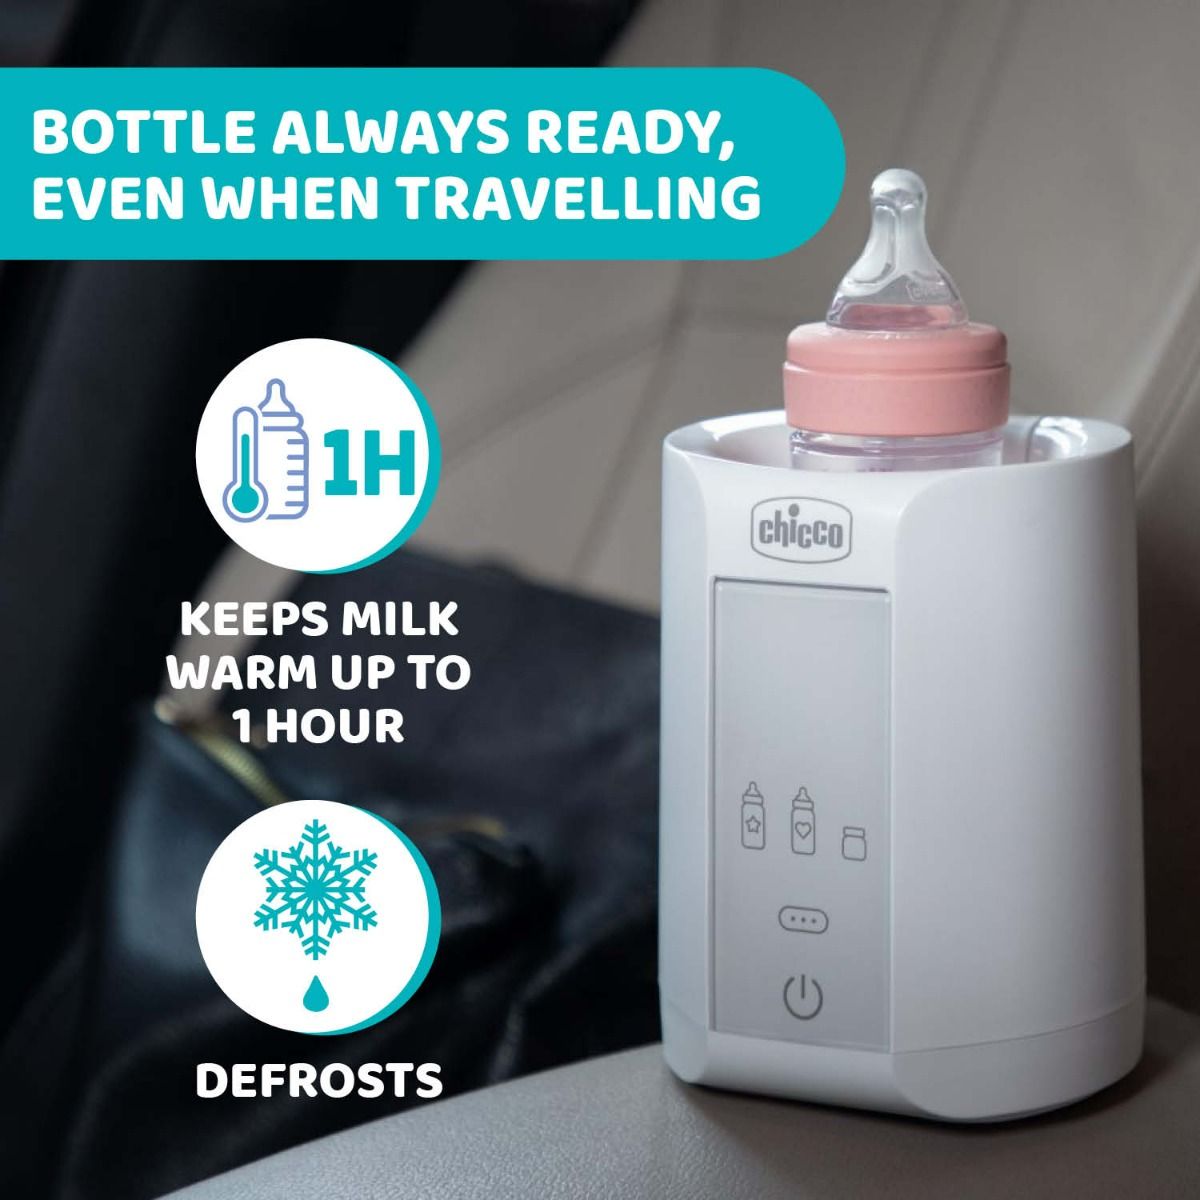 chicco home travel bottle warmer how to use